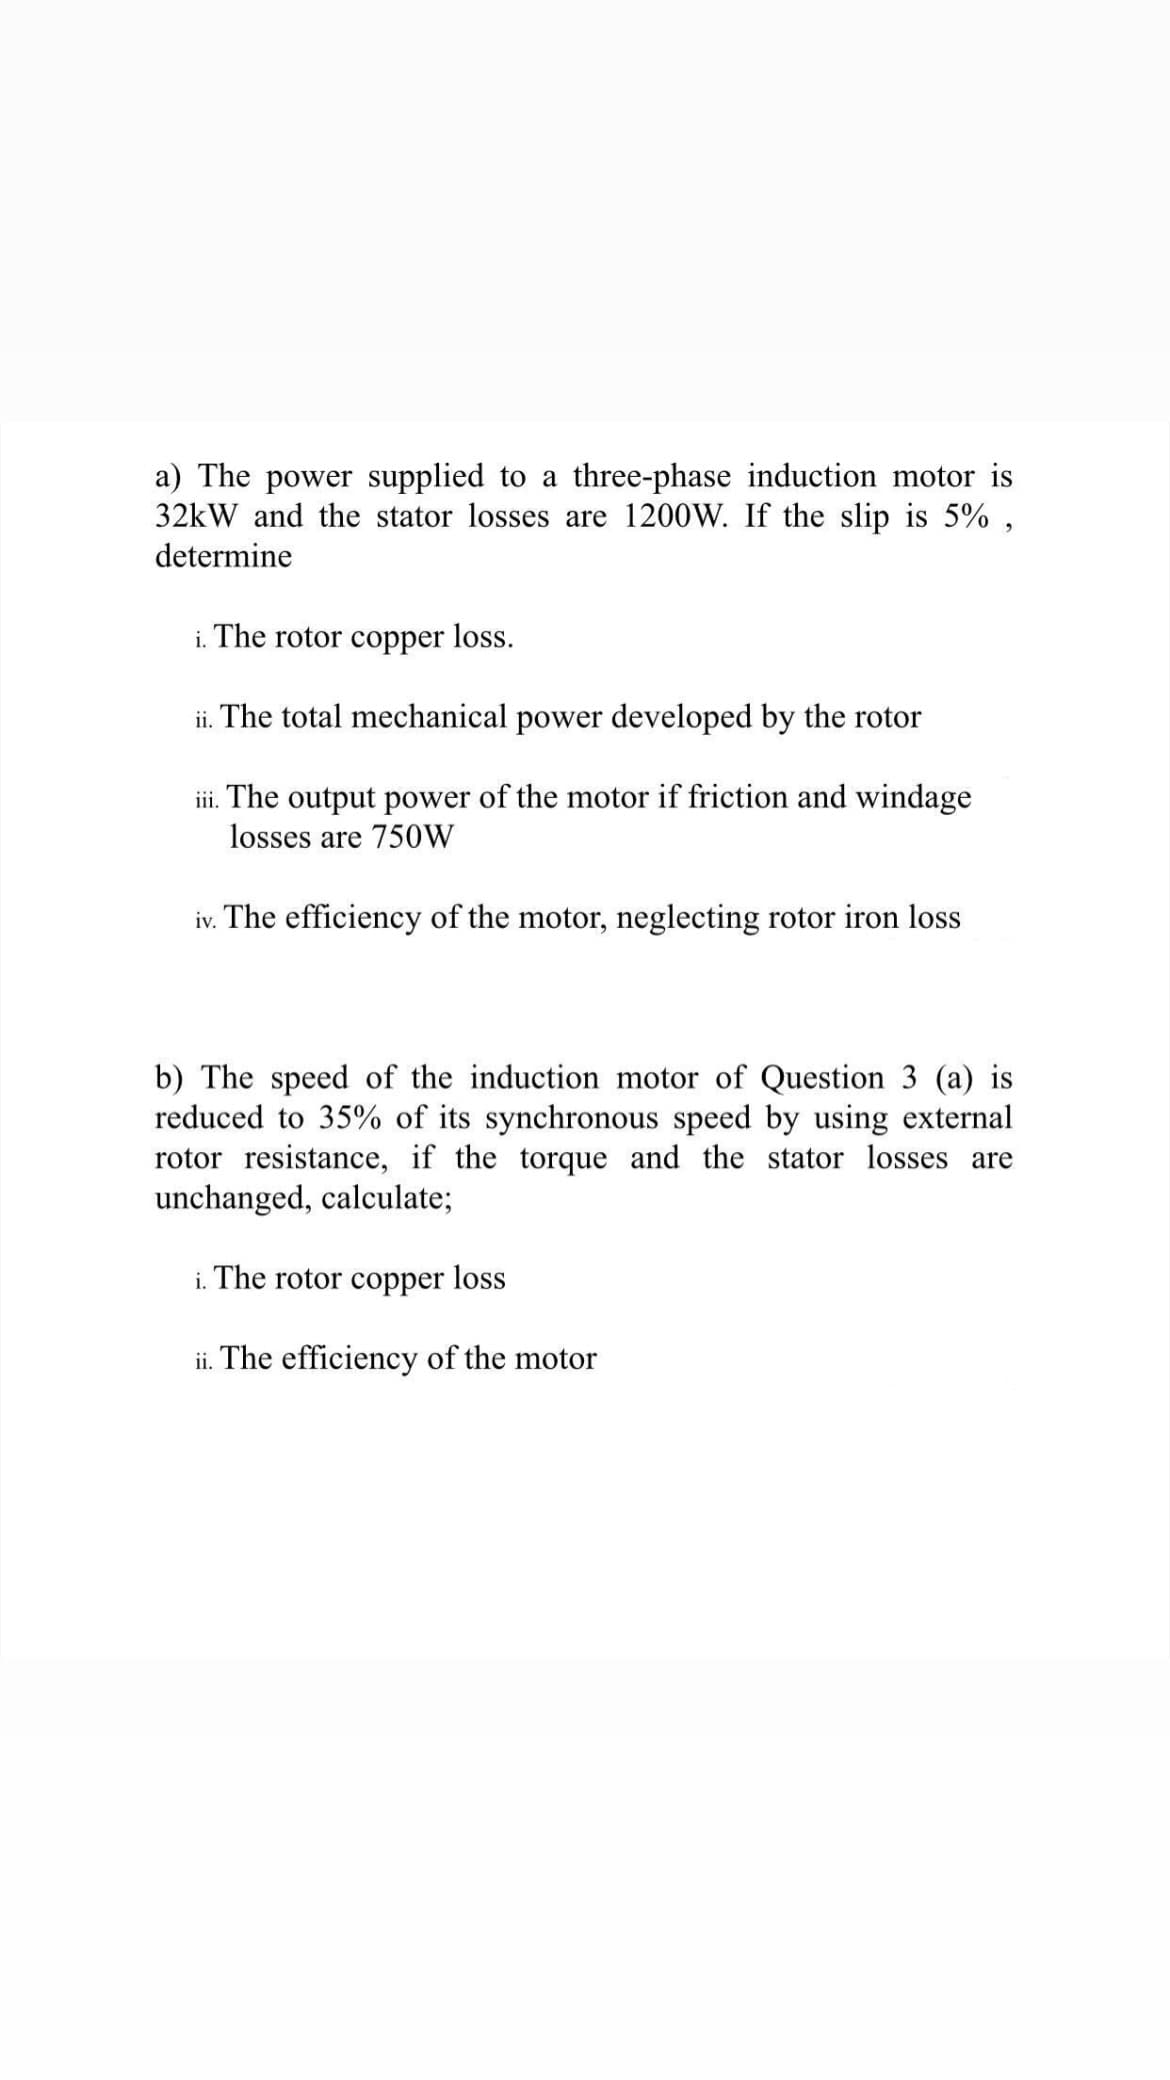 a) The power supplied to a three-phase induction motor is
32kW and the stator losses are 1200W. If the slip is 5% ,
determine
i. The rotor copper loss.
ii. The total mechanical power developed by the rotor
iii. The output power of the motor if friction and windage
losses are 750W
iv. The efficiency of the motor, neglecting rotor iron loss
b) The speed of the induction motor of Question 3 (a) is
reduced to 35% of its synchronous speed by using external
rotor resistance, if the torque and the stator losses are
unchanged, calculate;
i. The rotor copper loss
ii. The efficiency of the motor
